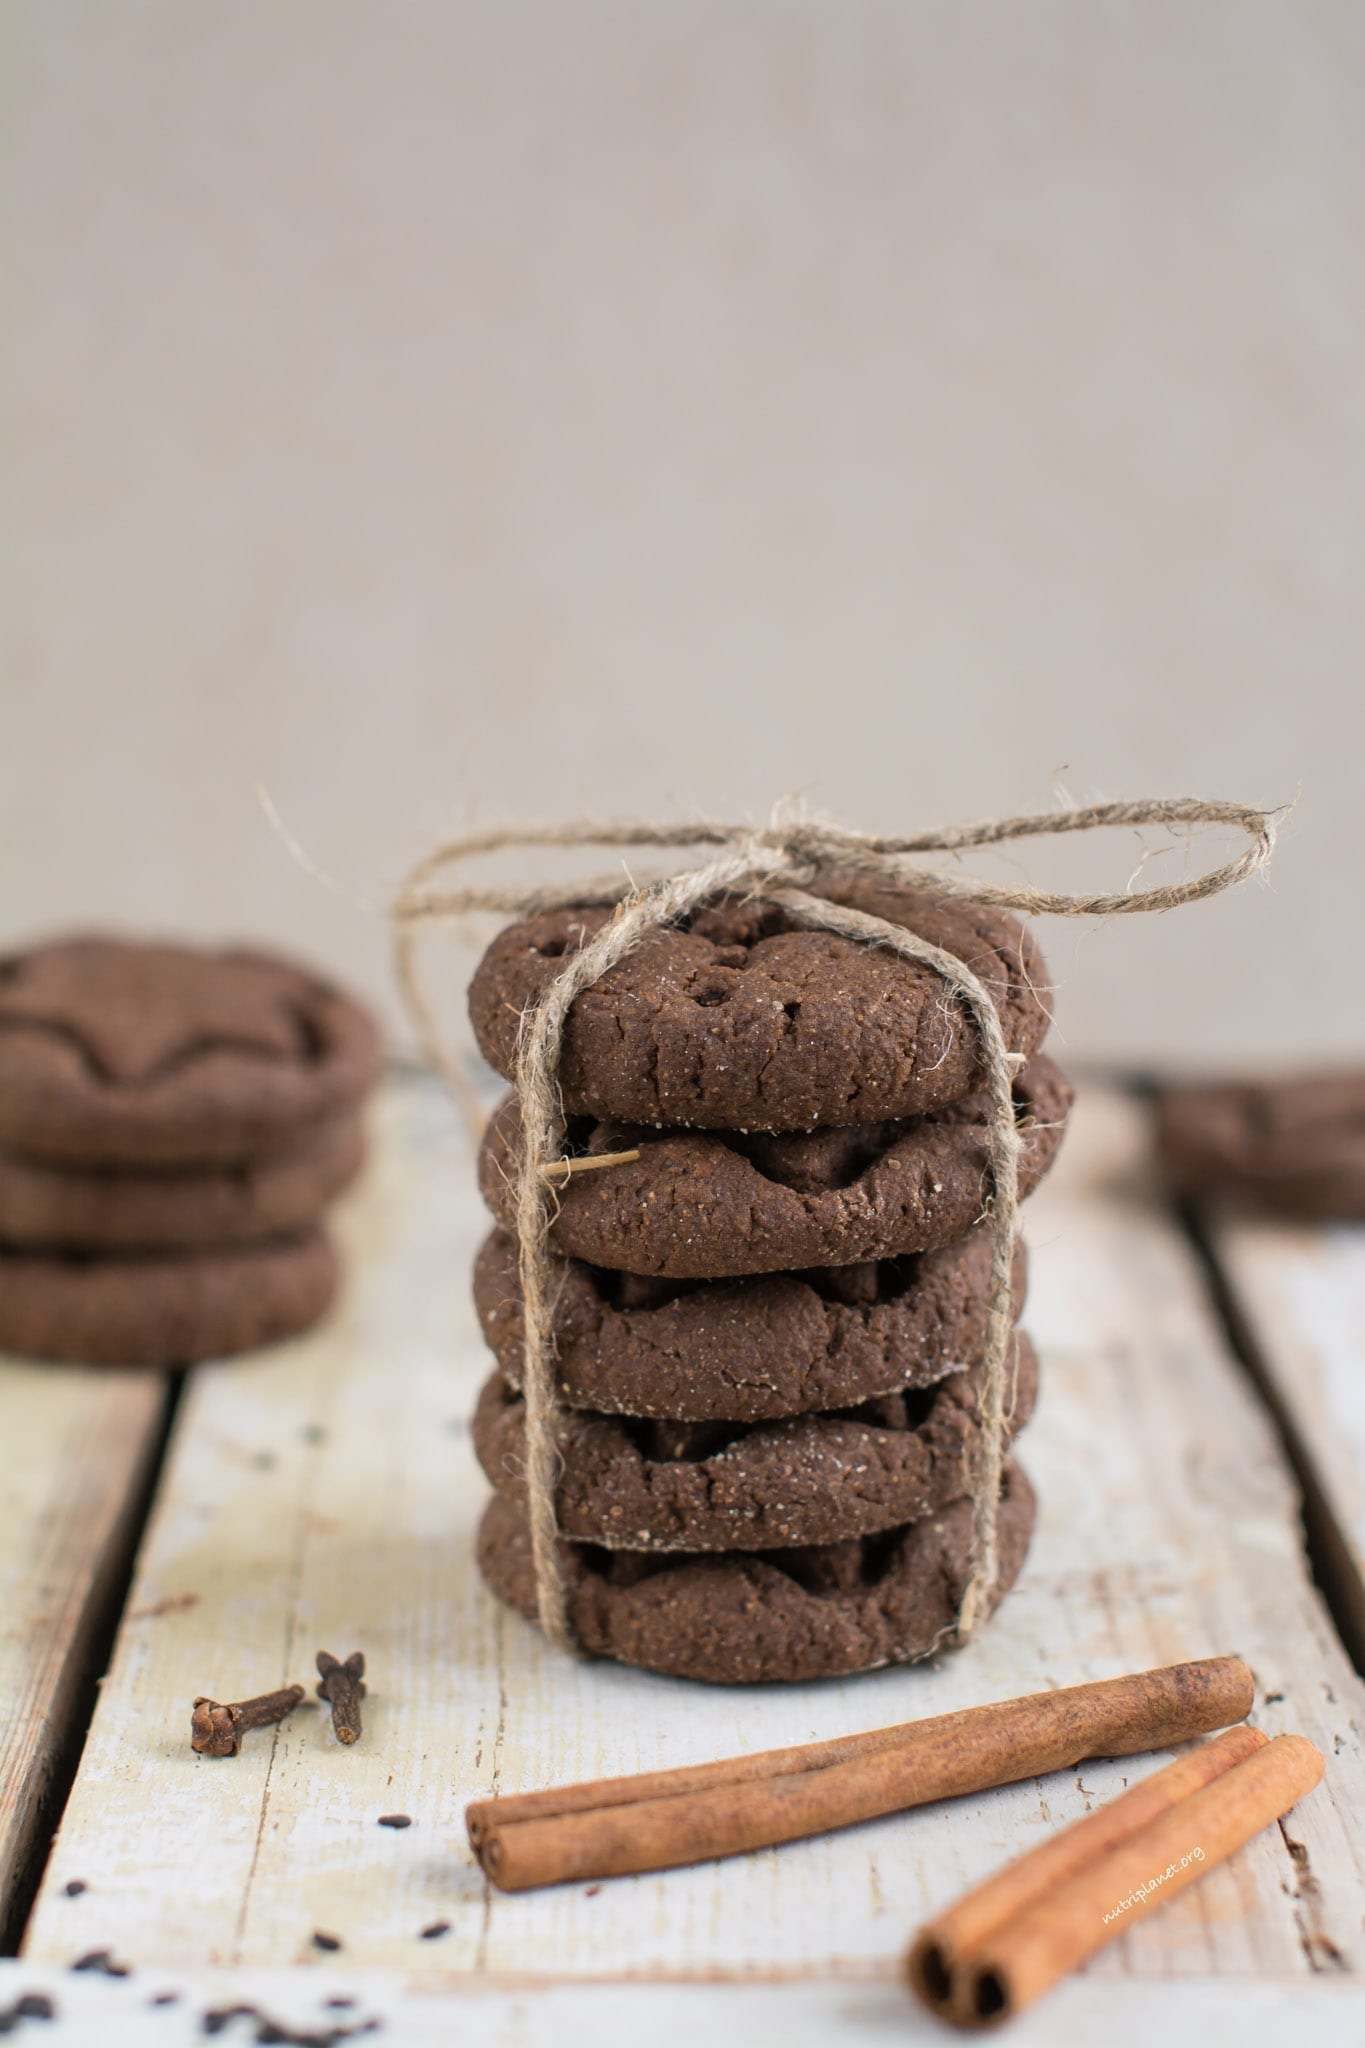 Chewy and Soft Gingerbread Cookies Recipe